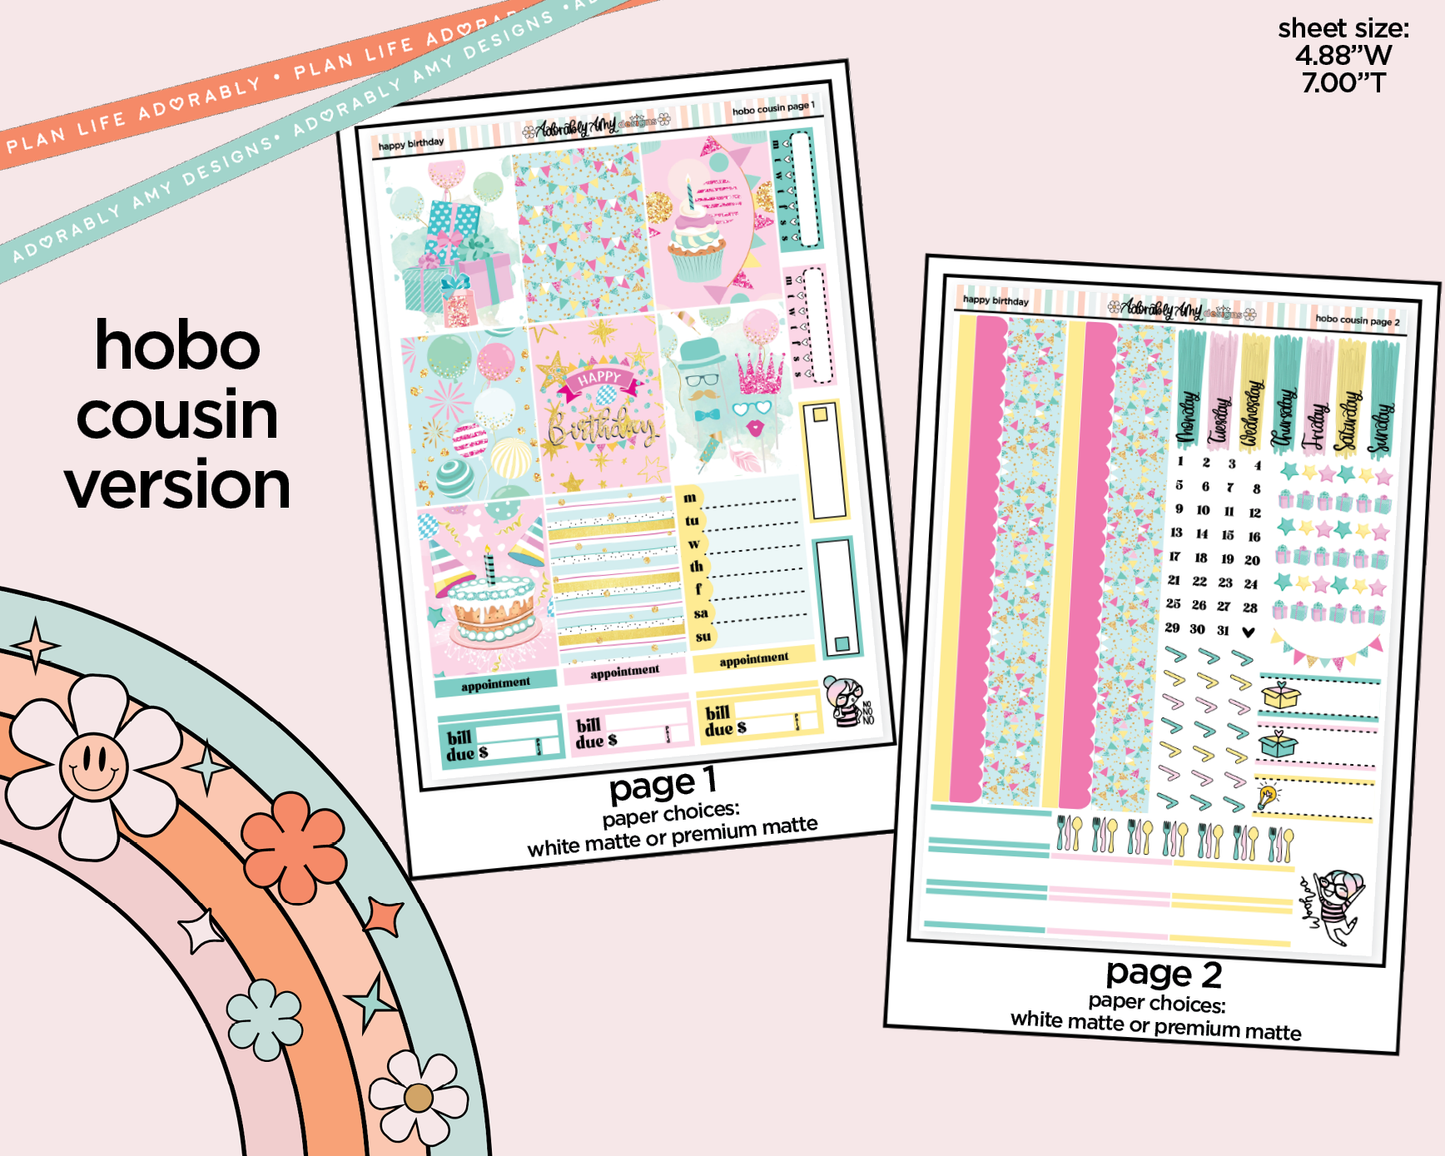 Hobonichi Cousin Weekly Happy Birthday Planner Sticker Kit for Hobo Cousin or Similar Planners